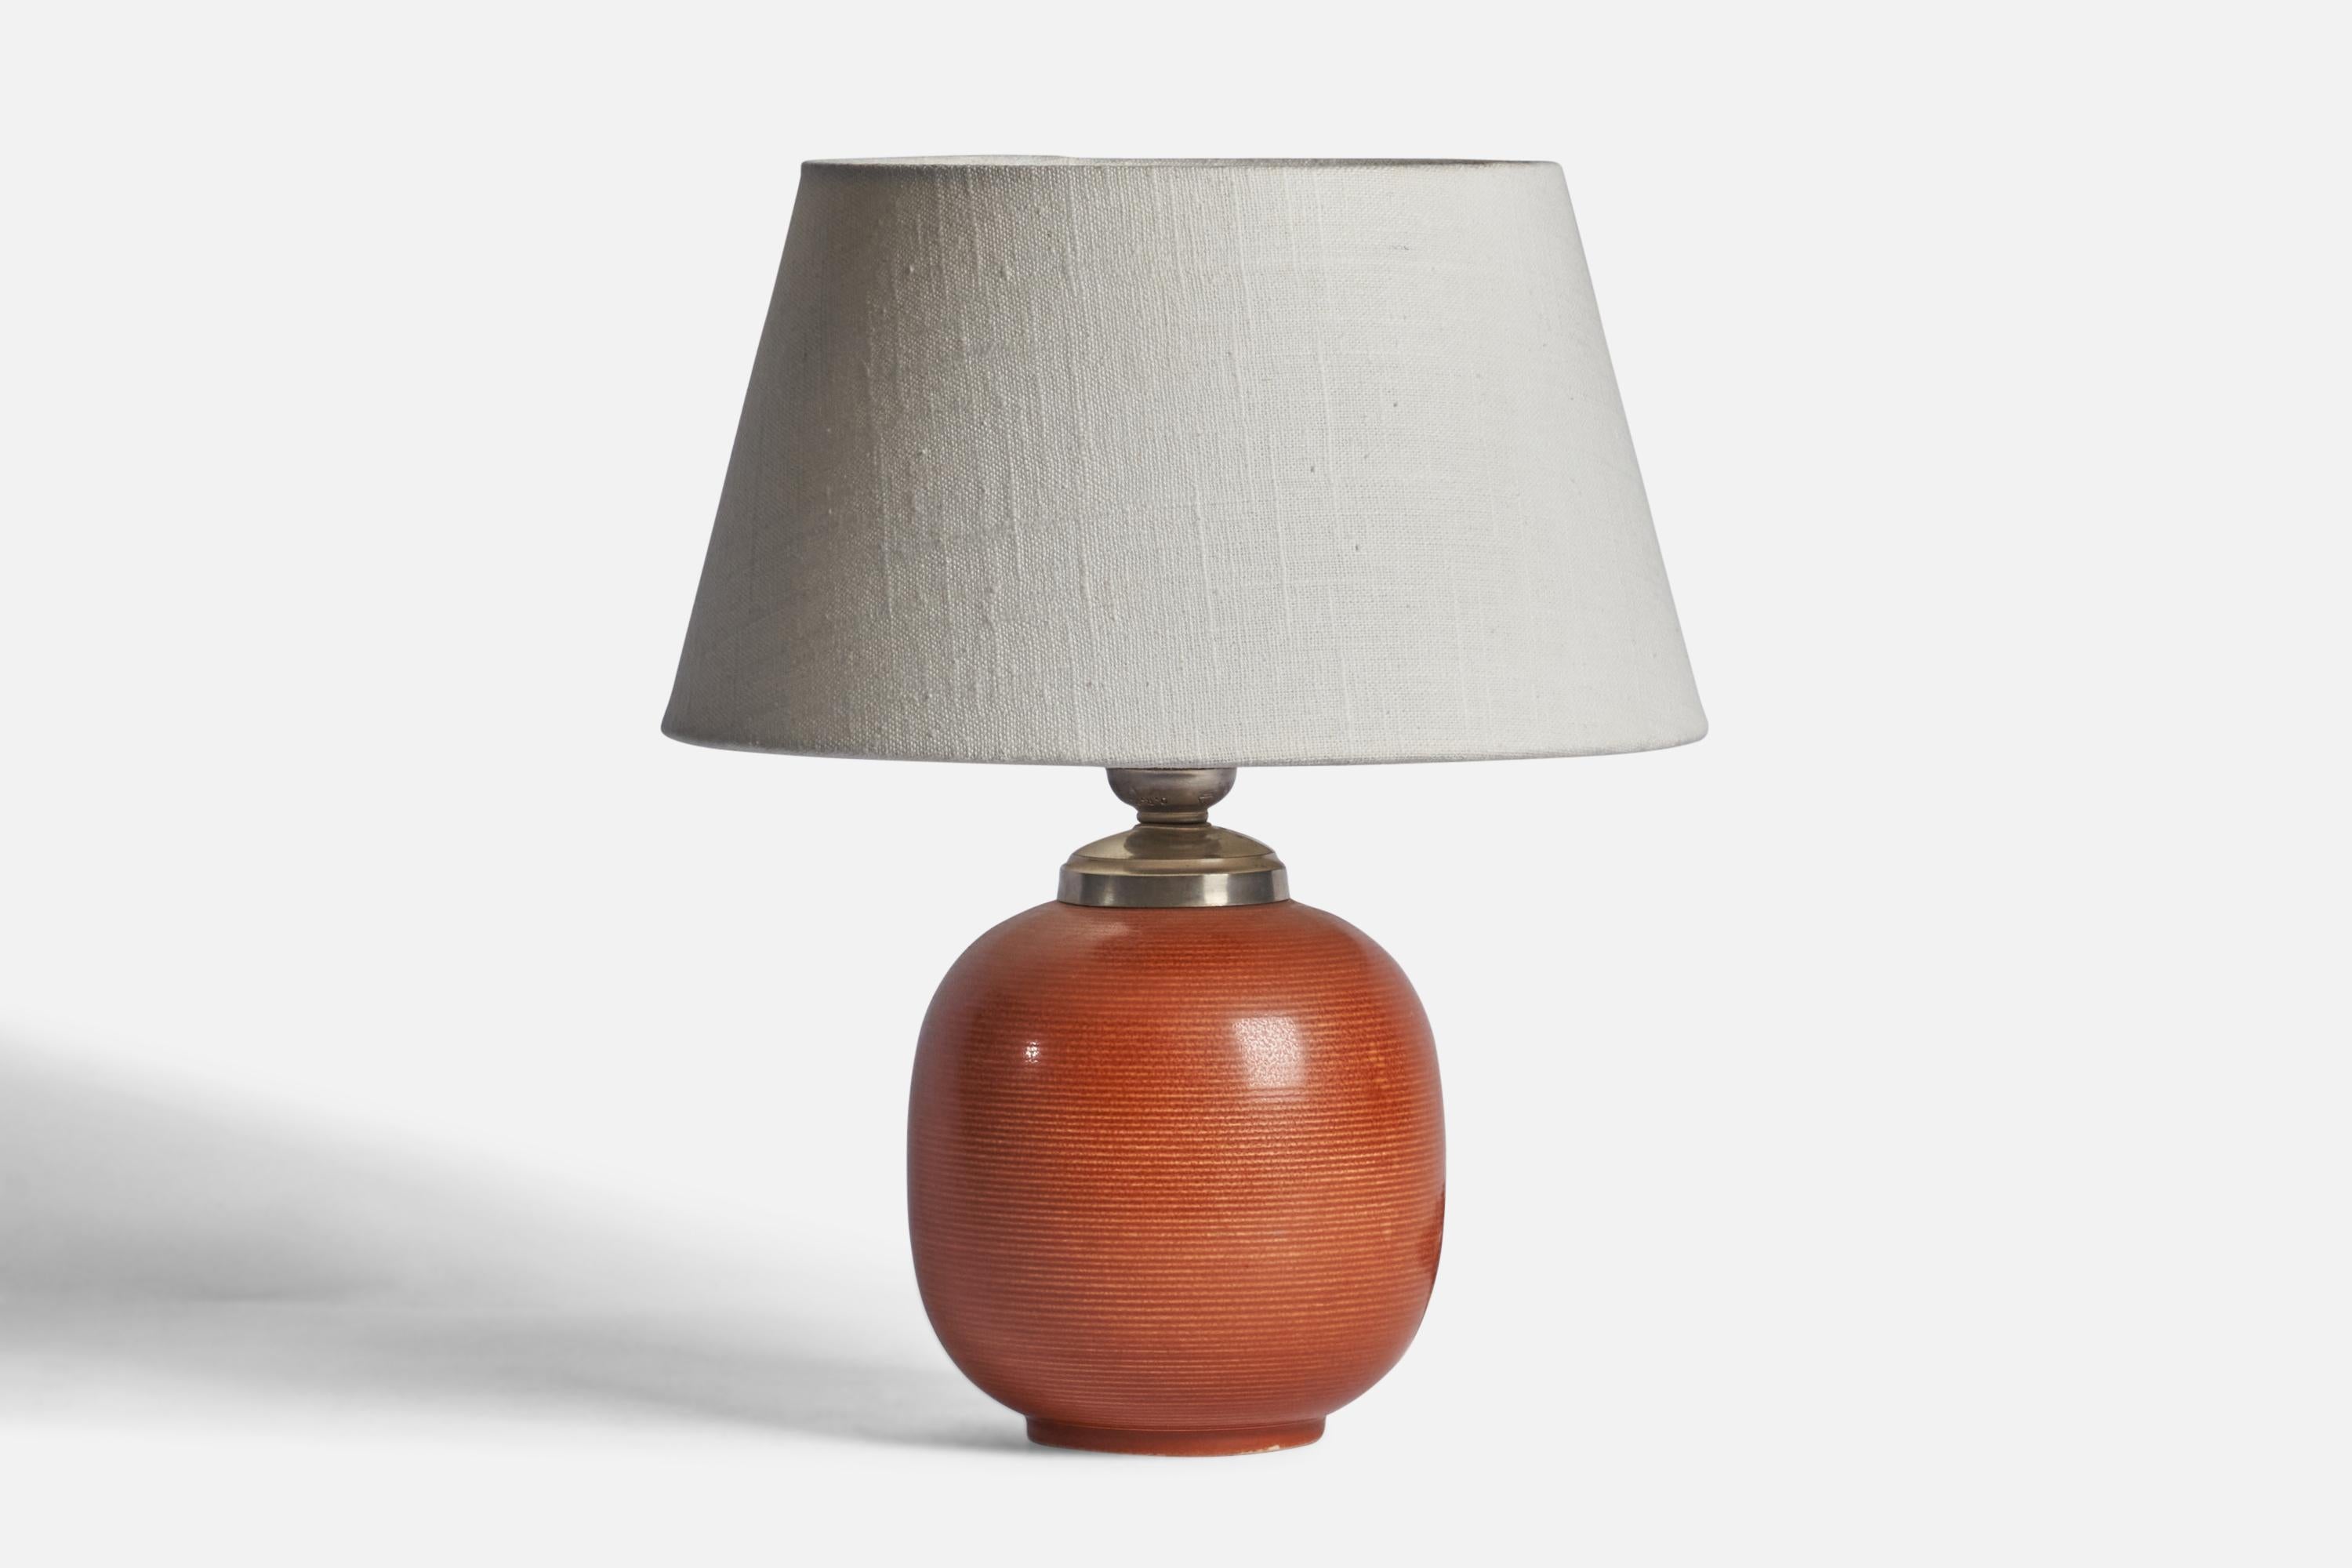 A red-glazed fluted stoneware and metal table lamp designed and produced by Rörstrand, Sweden, 1930s.

Dimensions of Lamp (inches): 9.25” H x 5” Diameter
Dimensions of Shade (inches): 7” Top Diameter x 10” Bottom Diameter x 5.5” H 
Dimensions of